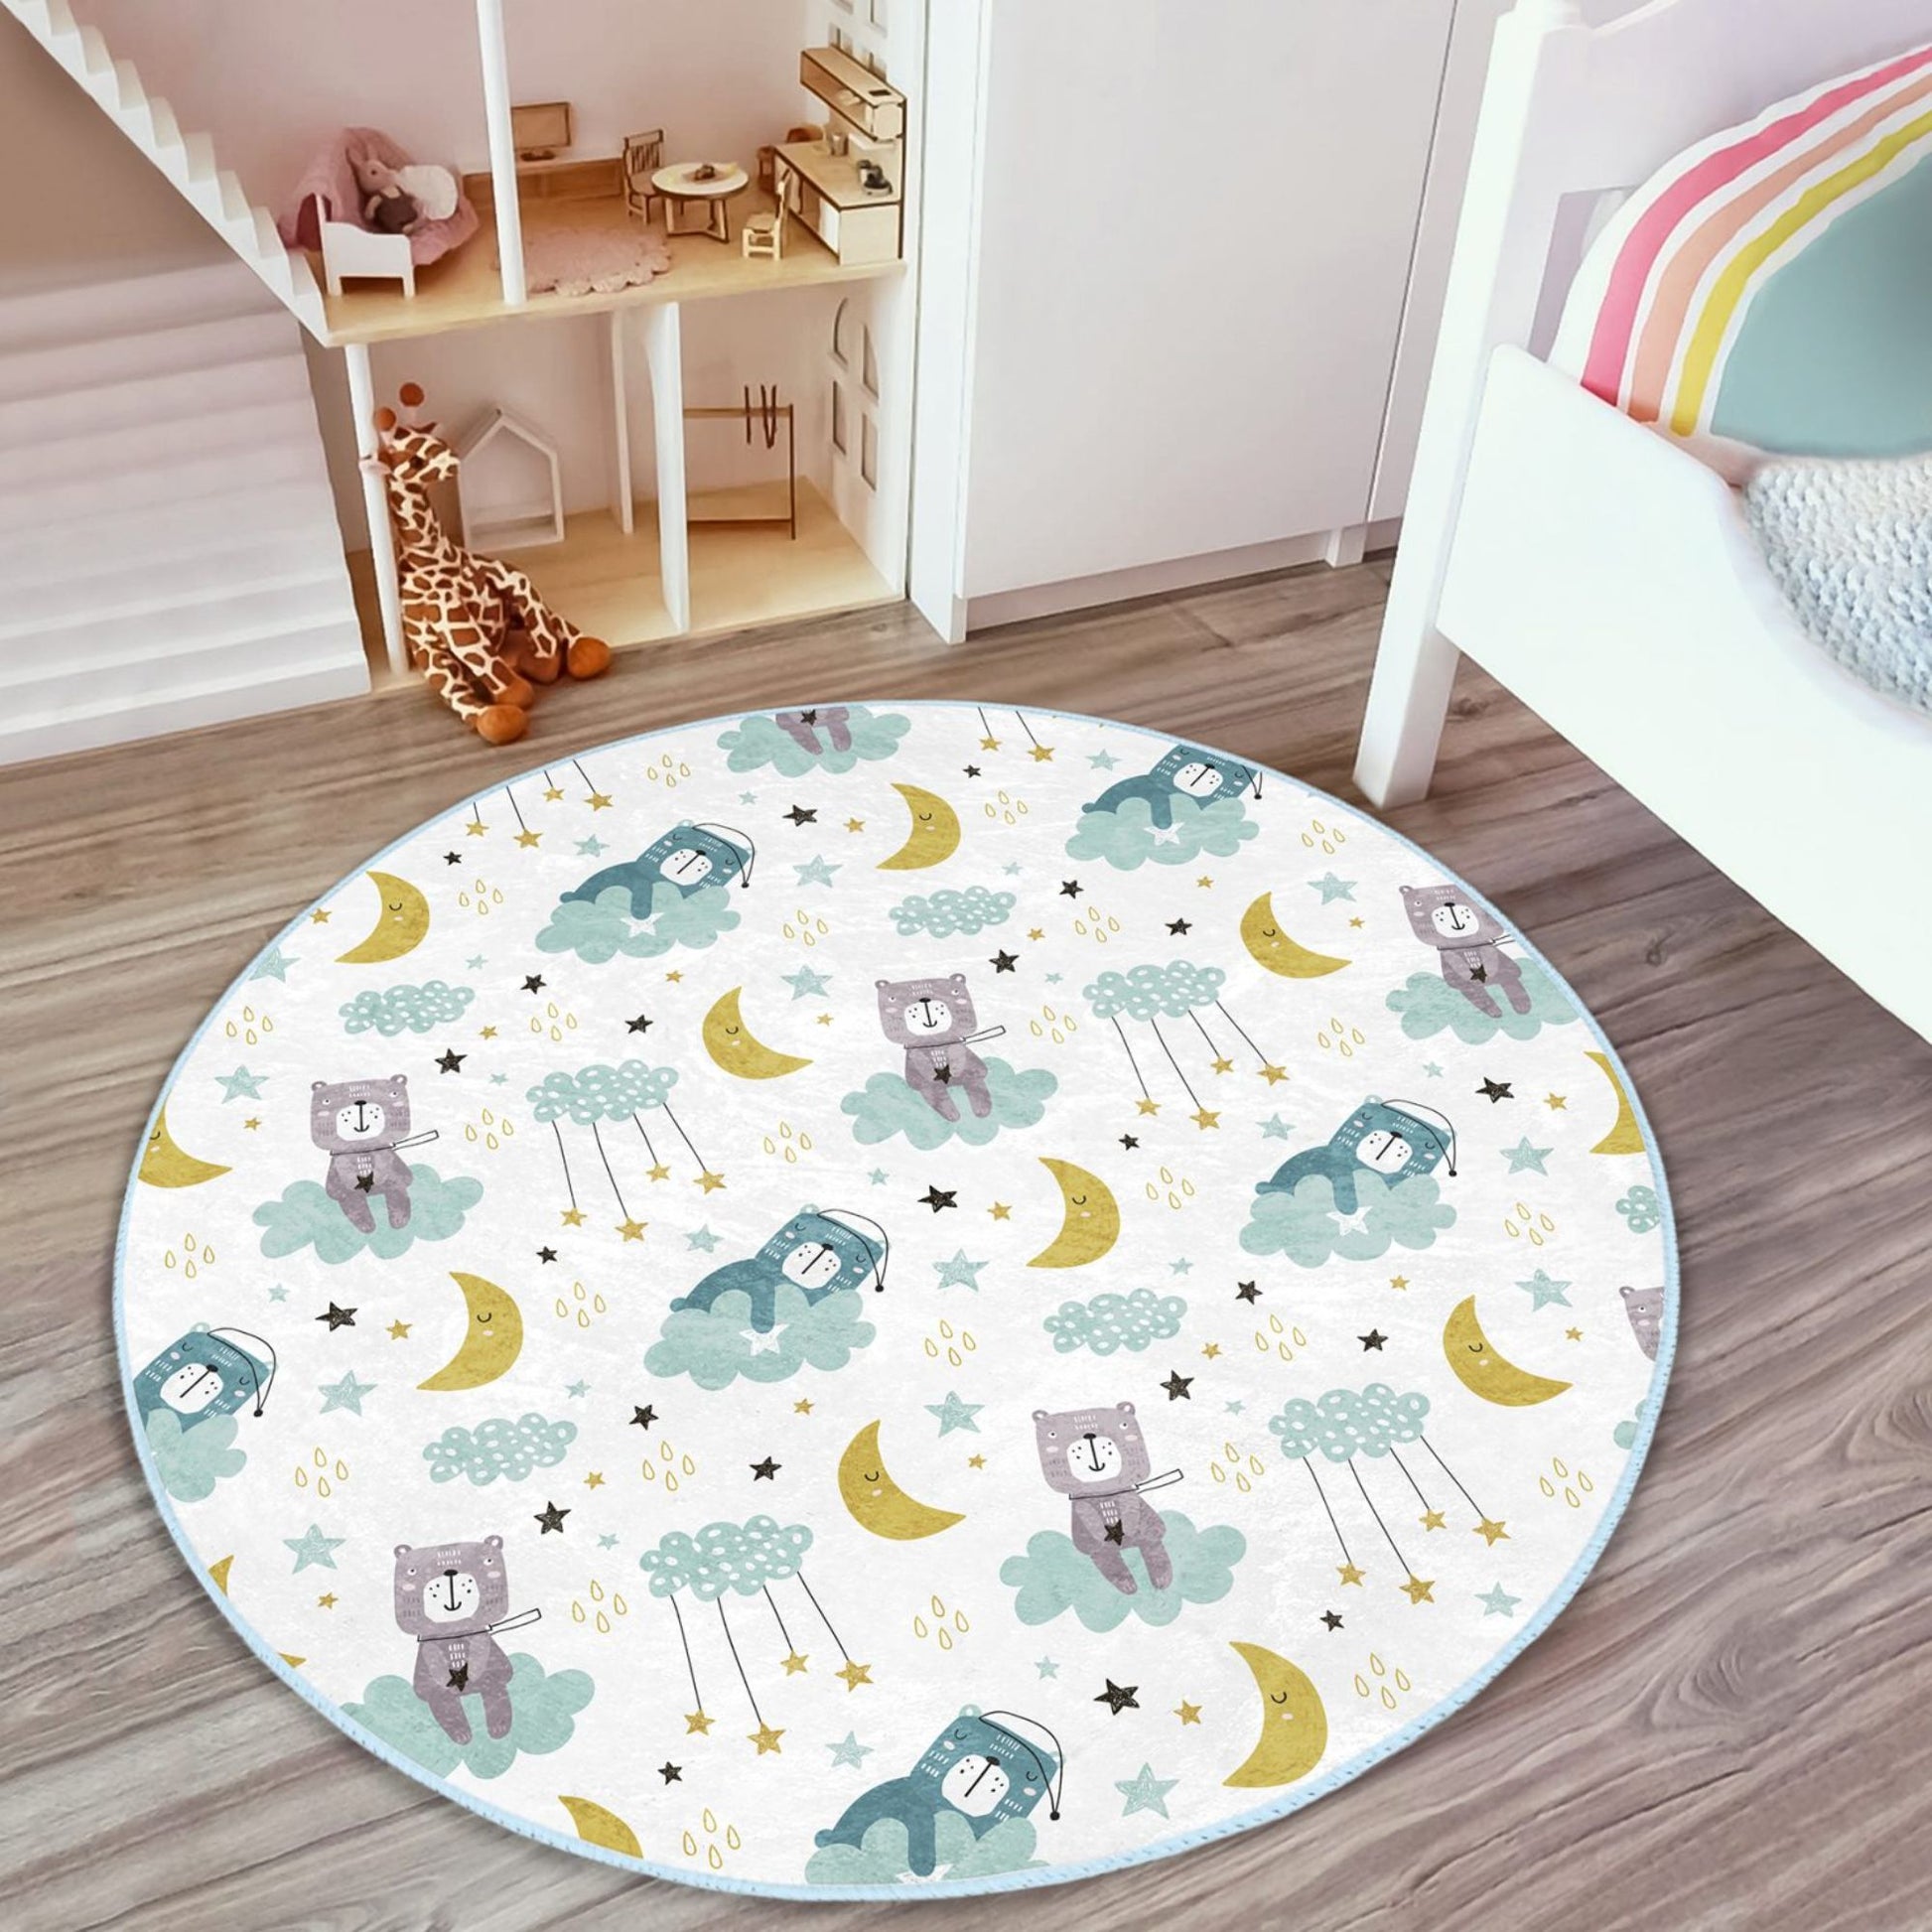 Dreamy Patterned Floor Rug - Ideal for Play Spaces